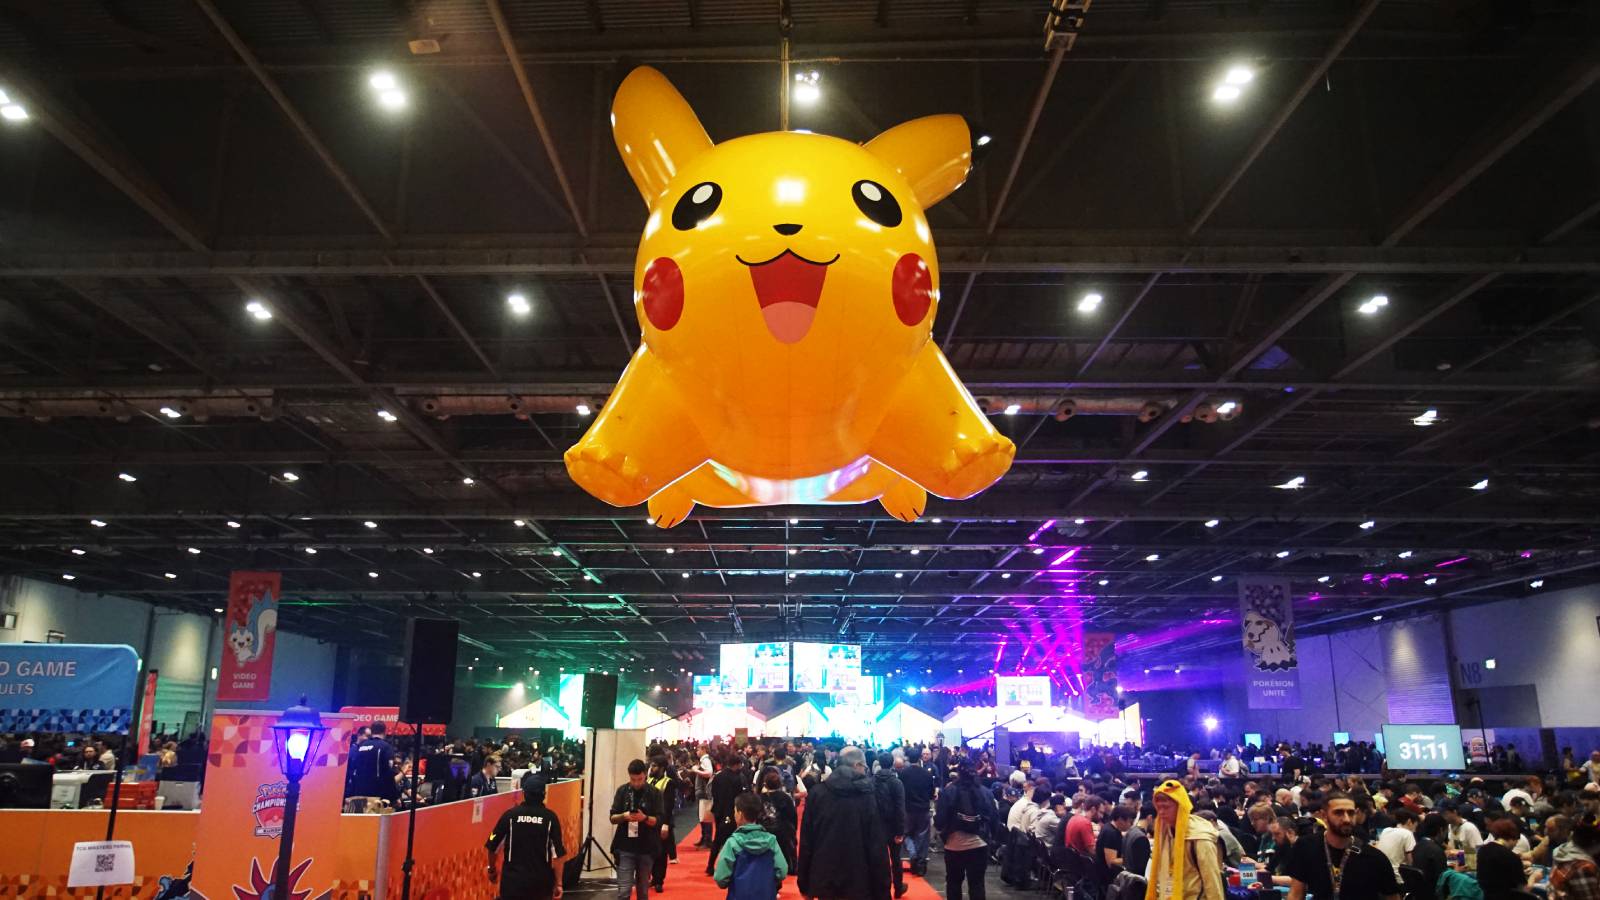 A giant Pikachu looms over a large hall